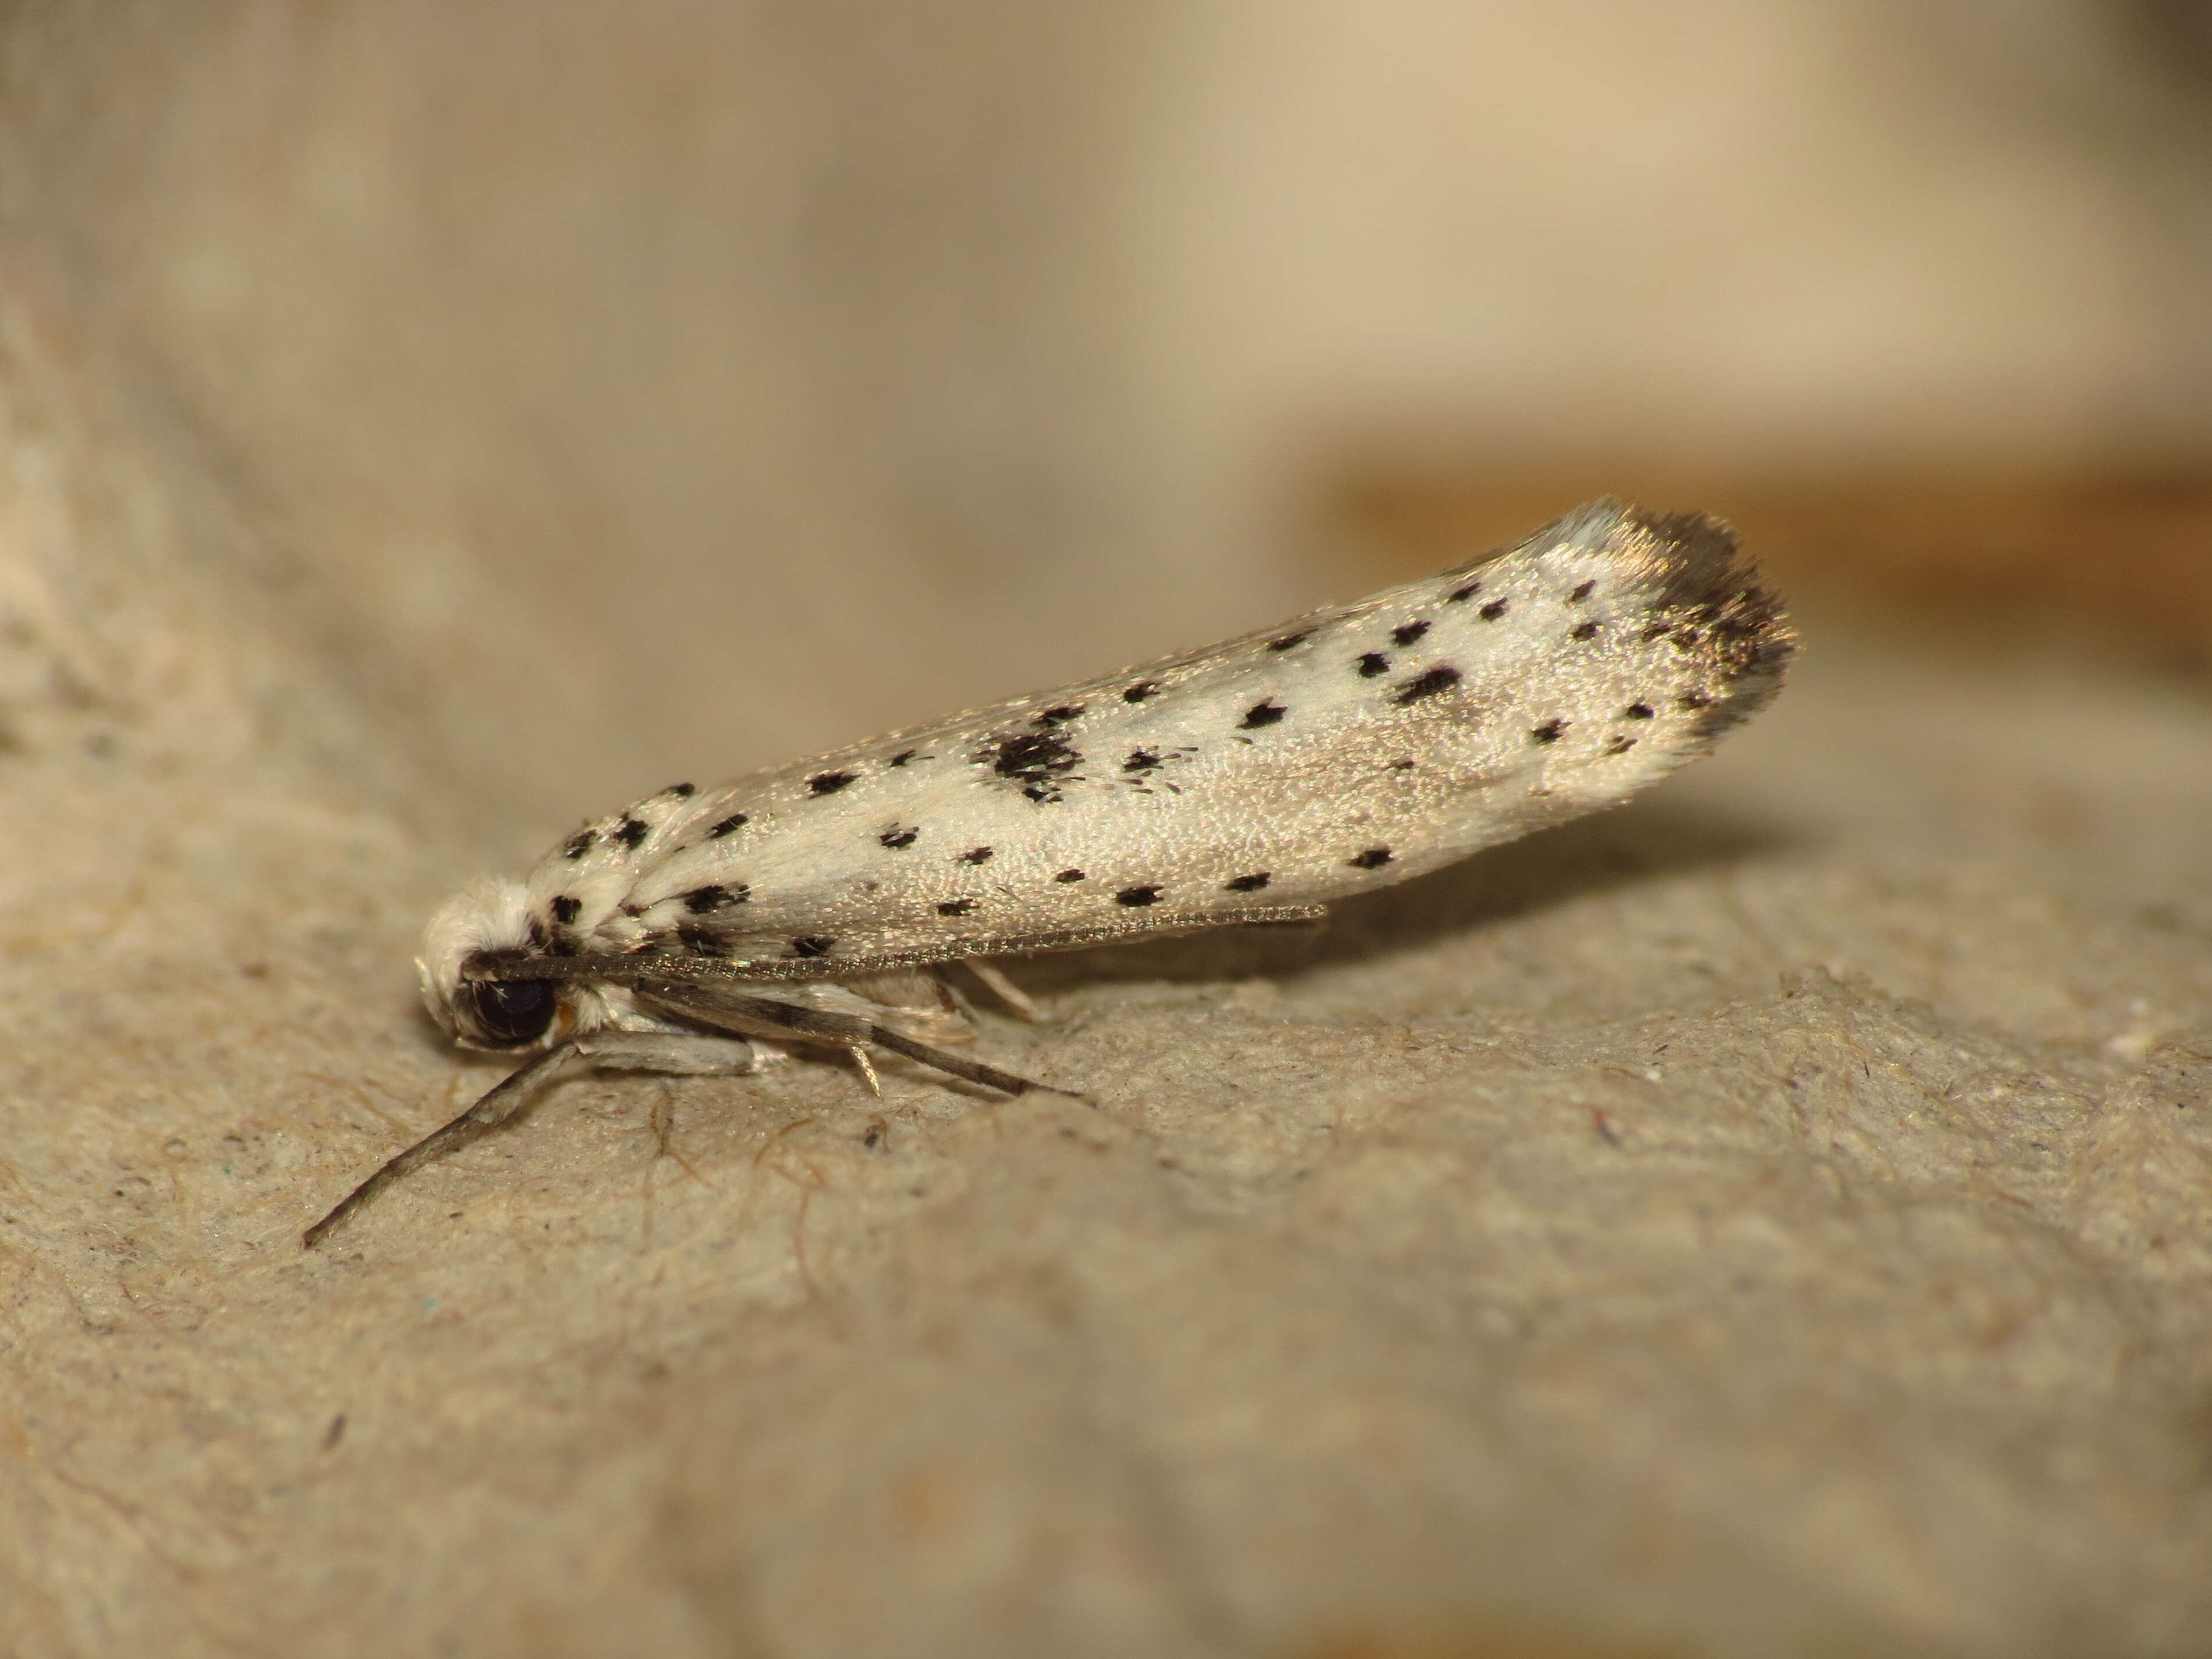 Image of black-tipped ermine